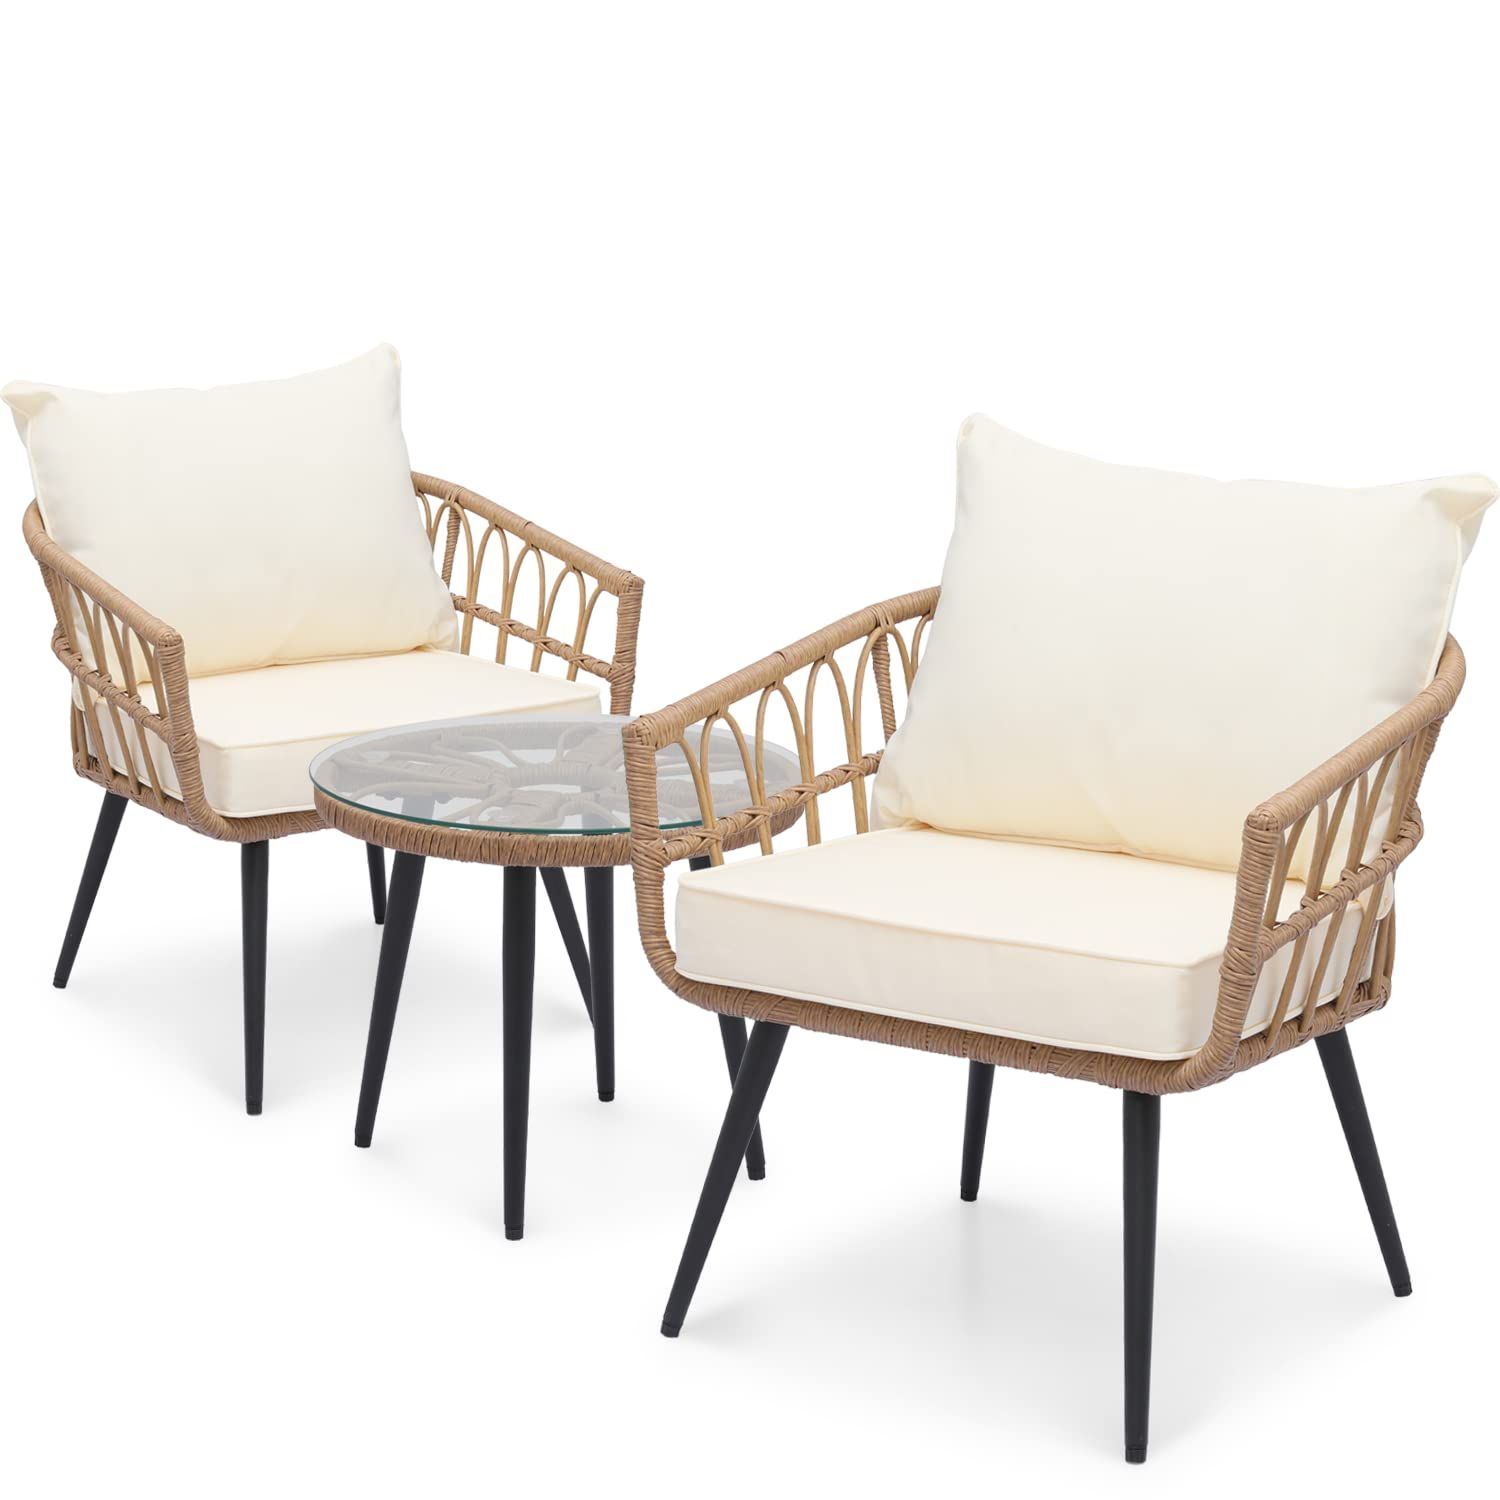 Exploring the Latest Trends in Outdoor Living Collections